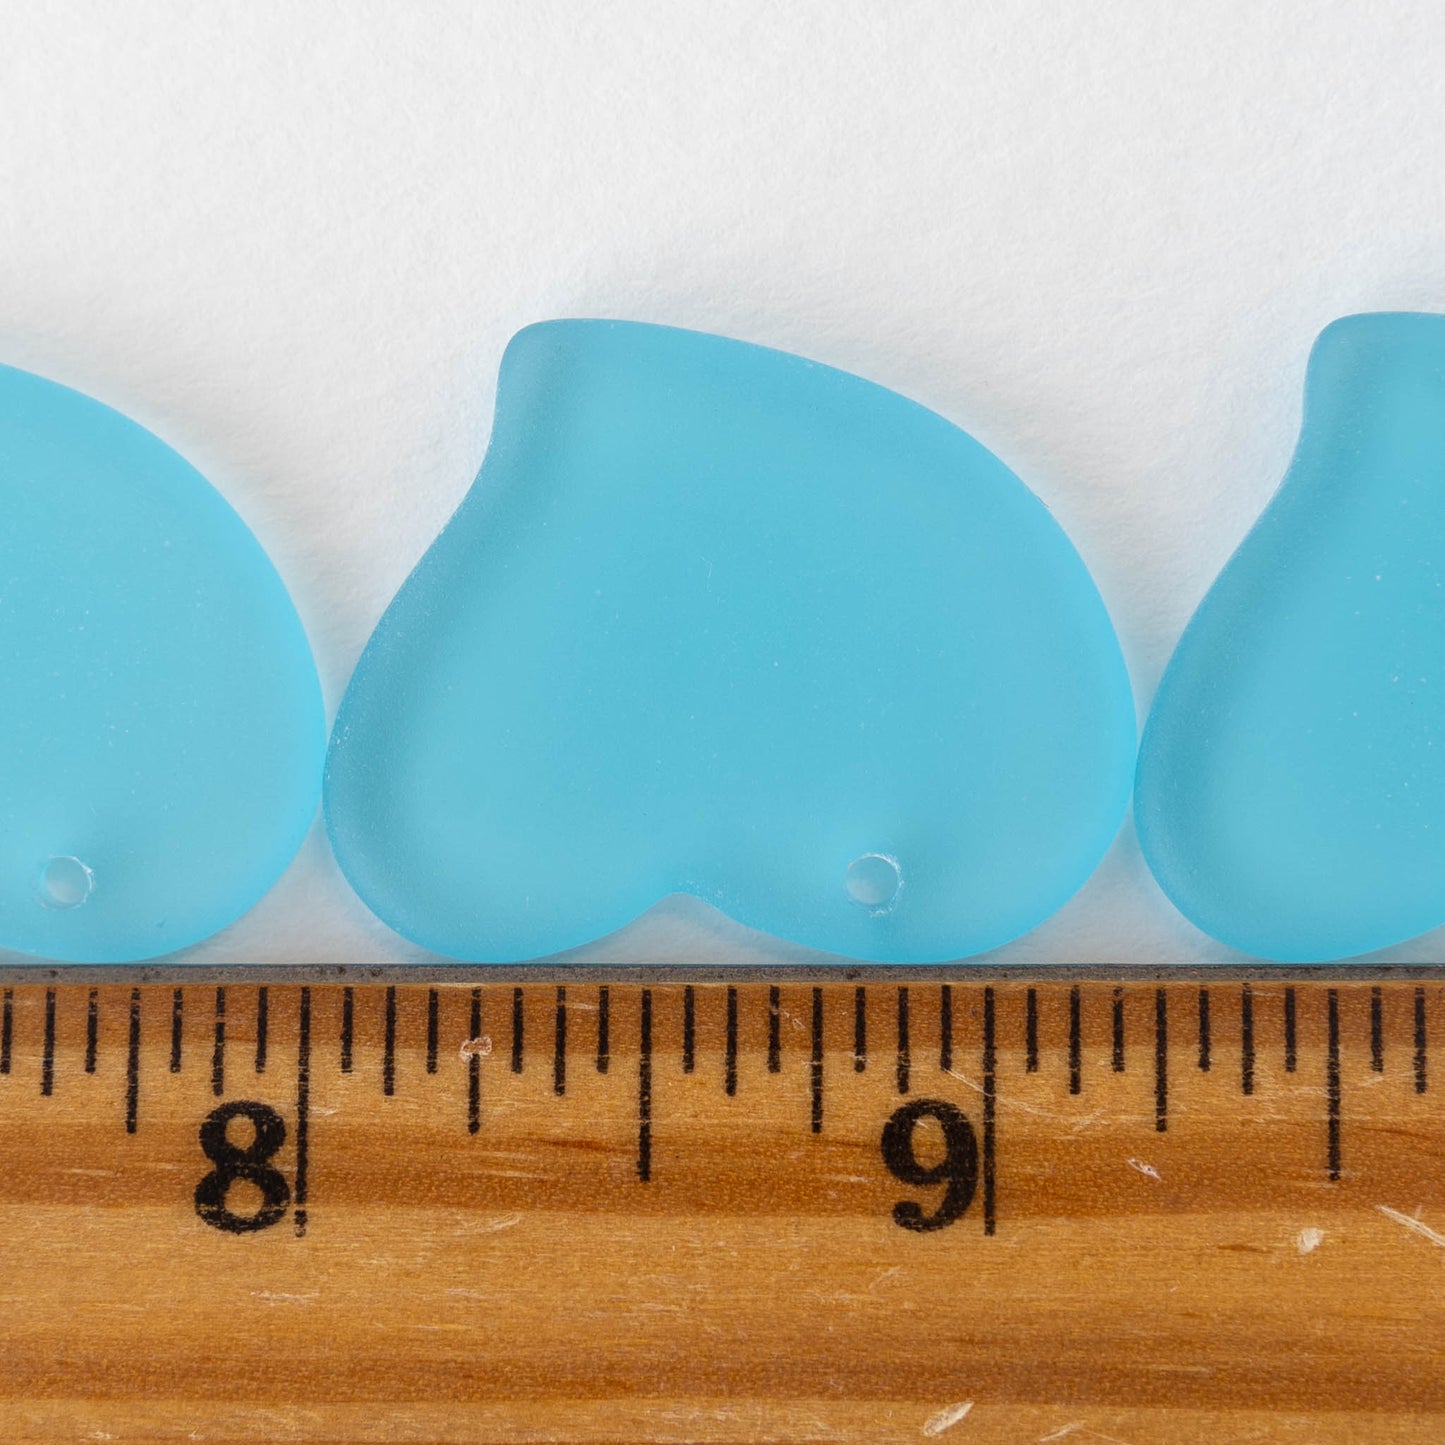 30mm Frosted Glass Hearts - Aqua Blue - 2 Beads